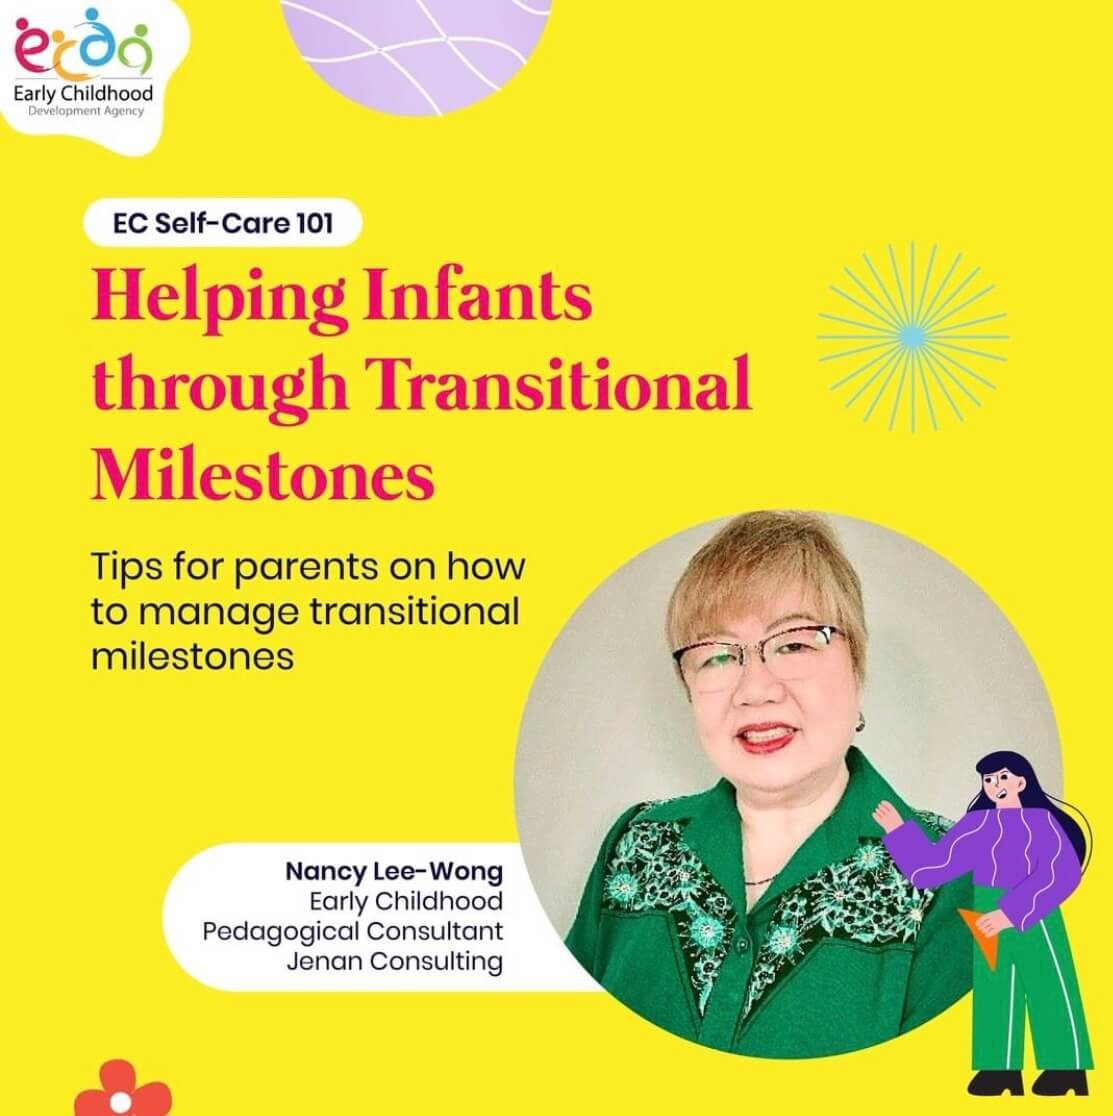 Nancy and Infants transition for parents and tips